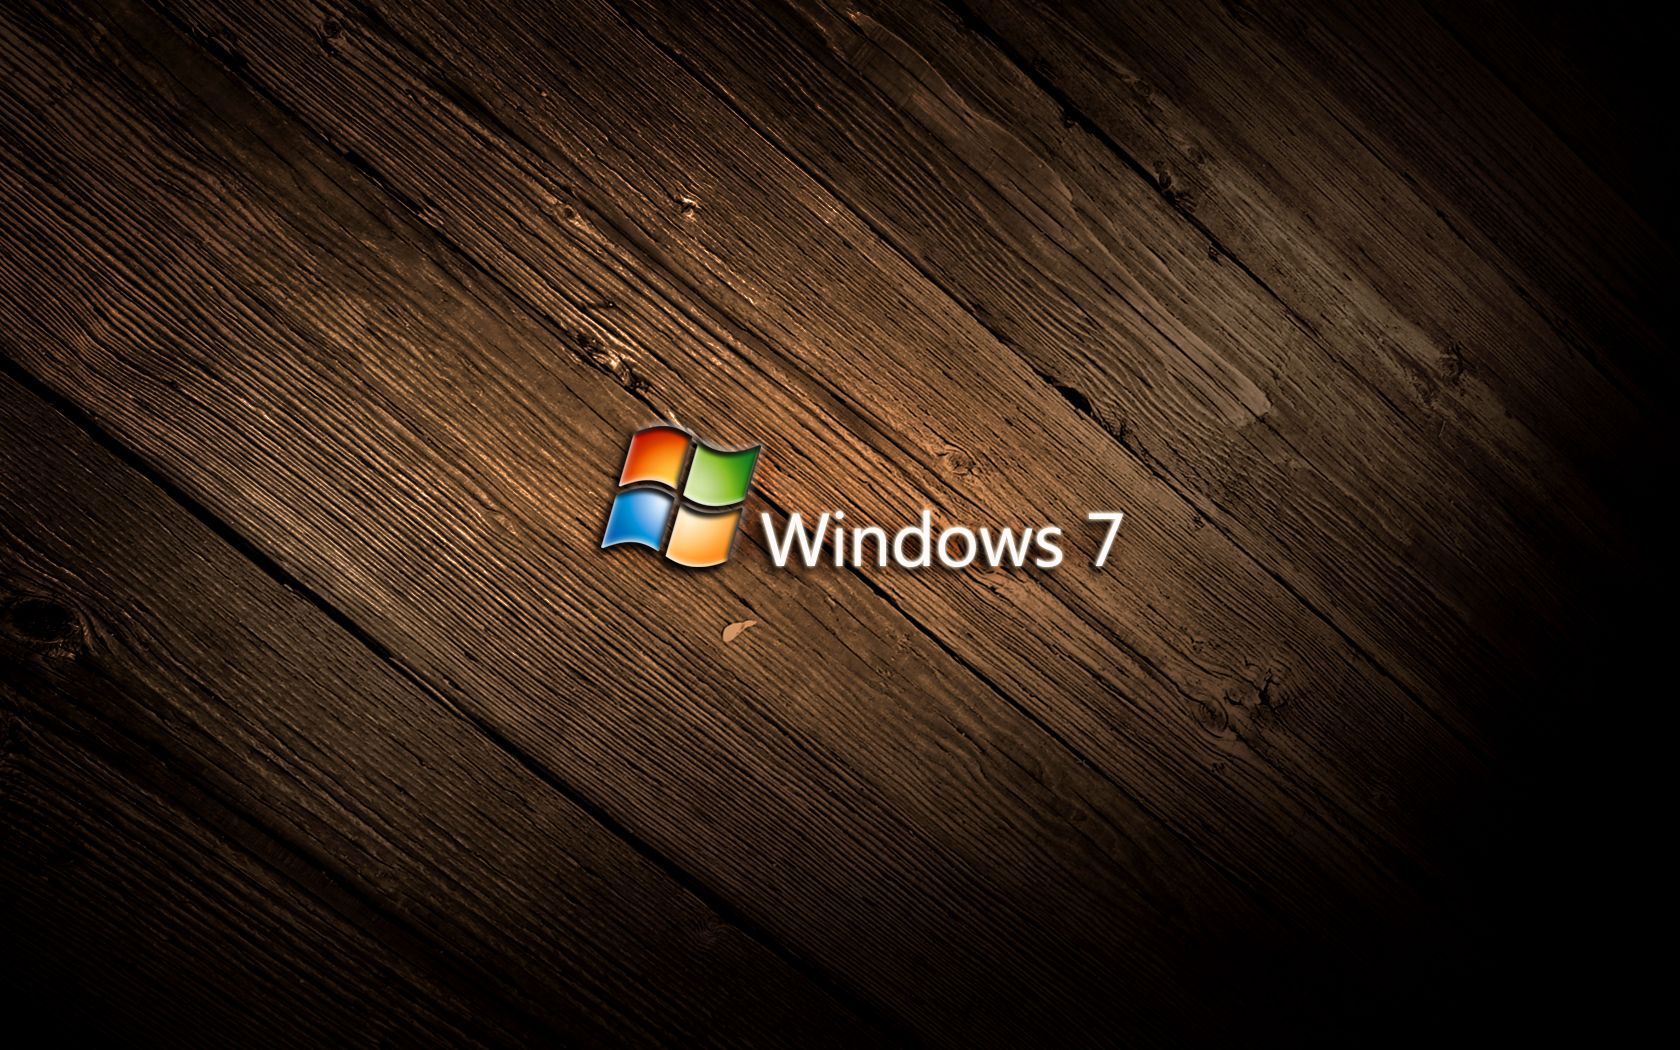 Windows 7 HD Wallpapers - HD Wallpapers Backgrounds of Your Choice